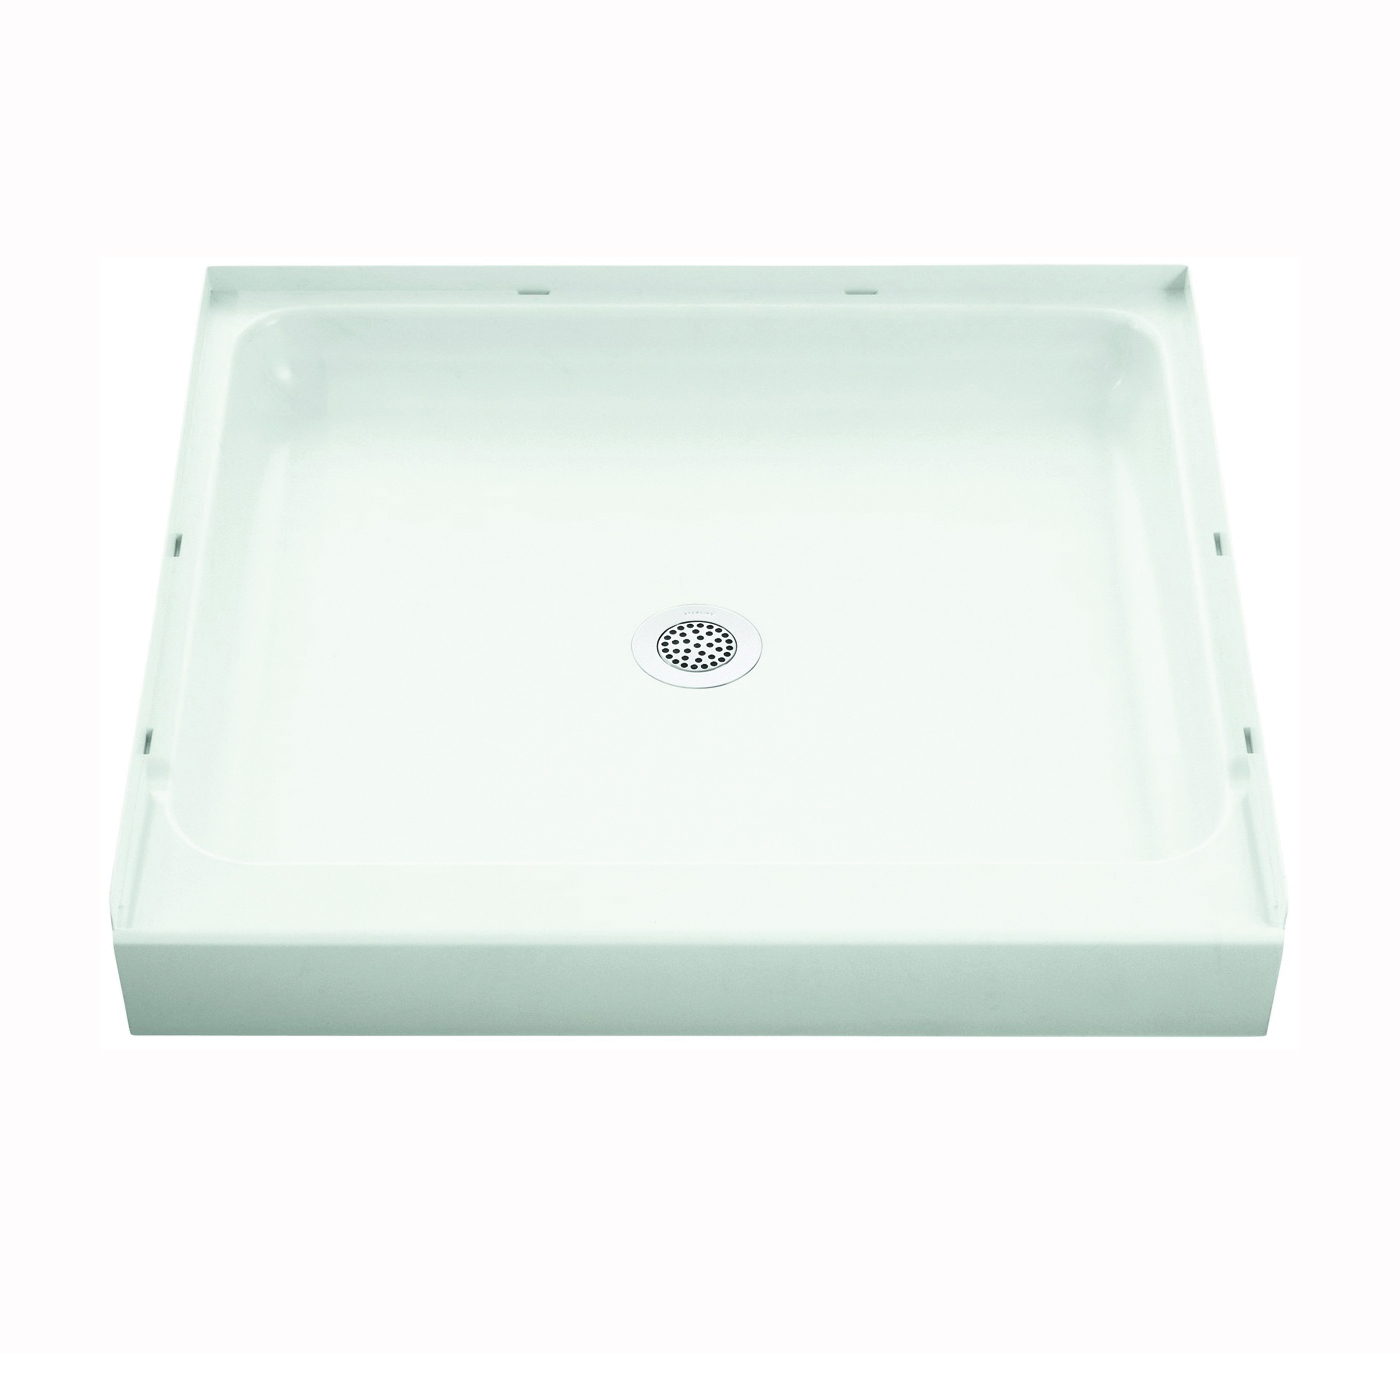 Ensemble 72101100-0 Shower Base, 34 in L, 36 in W, 5-1/2 in H, Vikrell, White, Alcove Installation